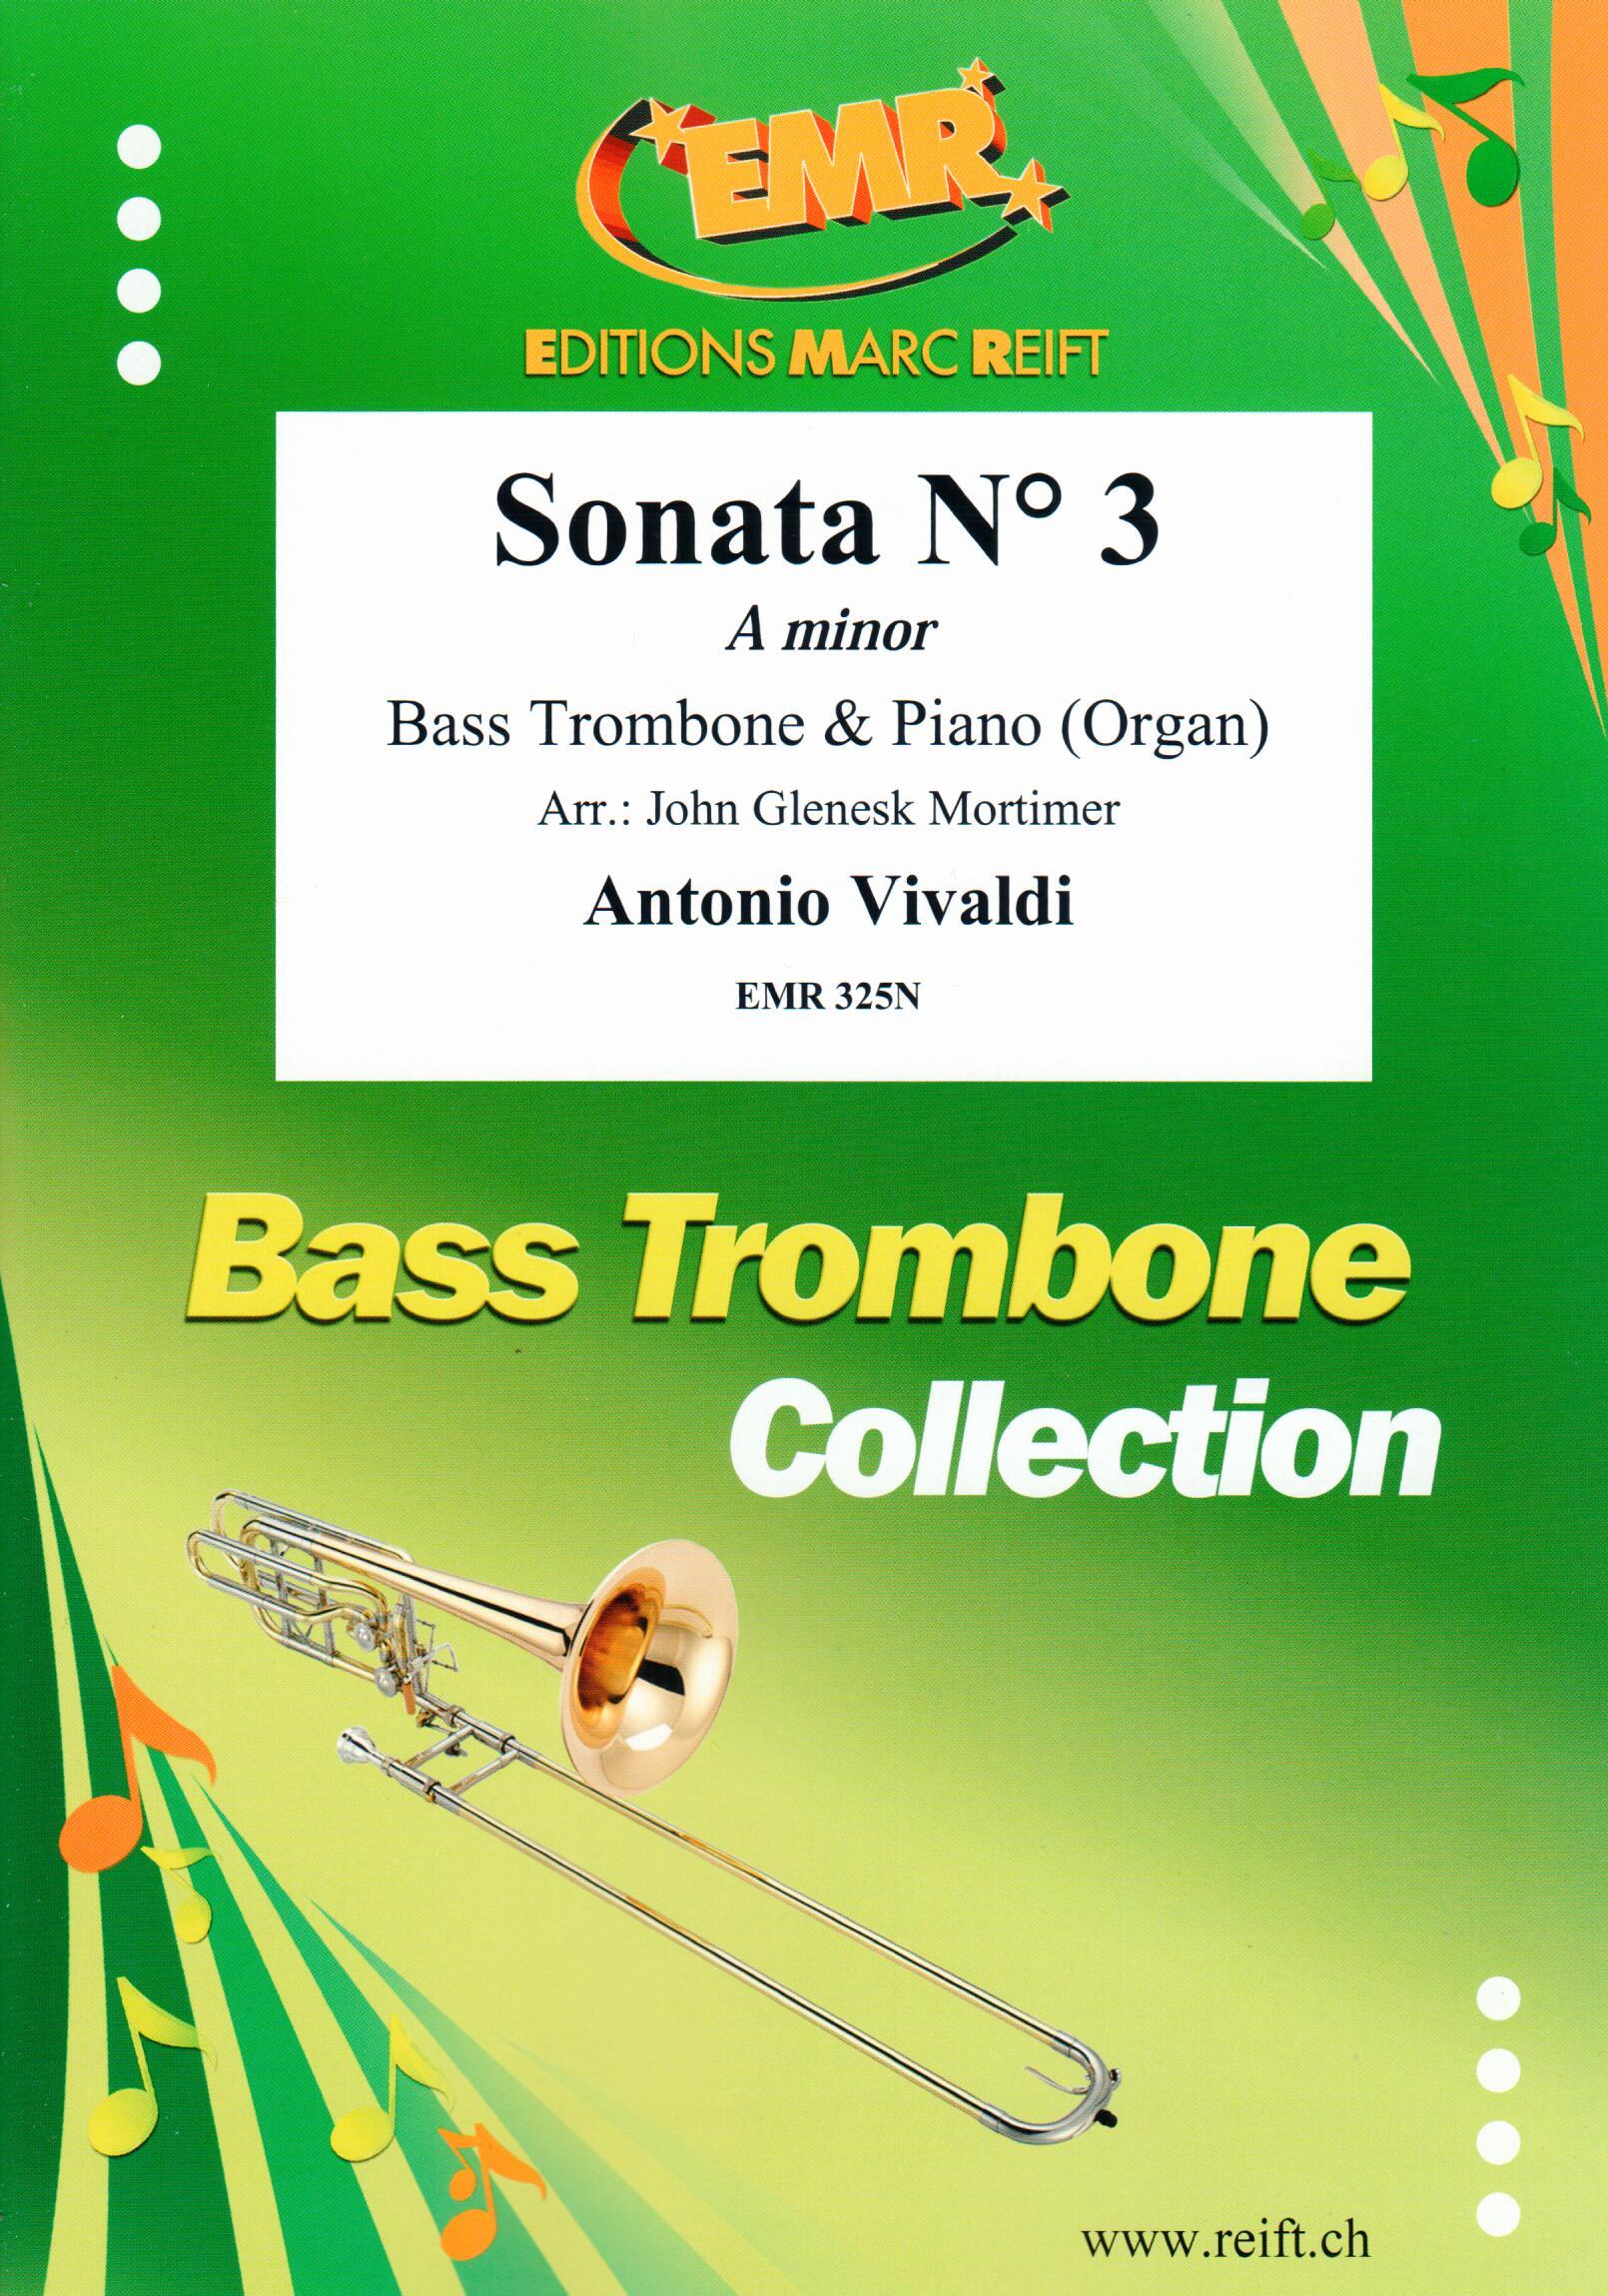 SONATA N° 3 IN A MINOR - Parts & Score, NEW & RECENT Publications, SOLOS for Bass Trombone